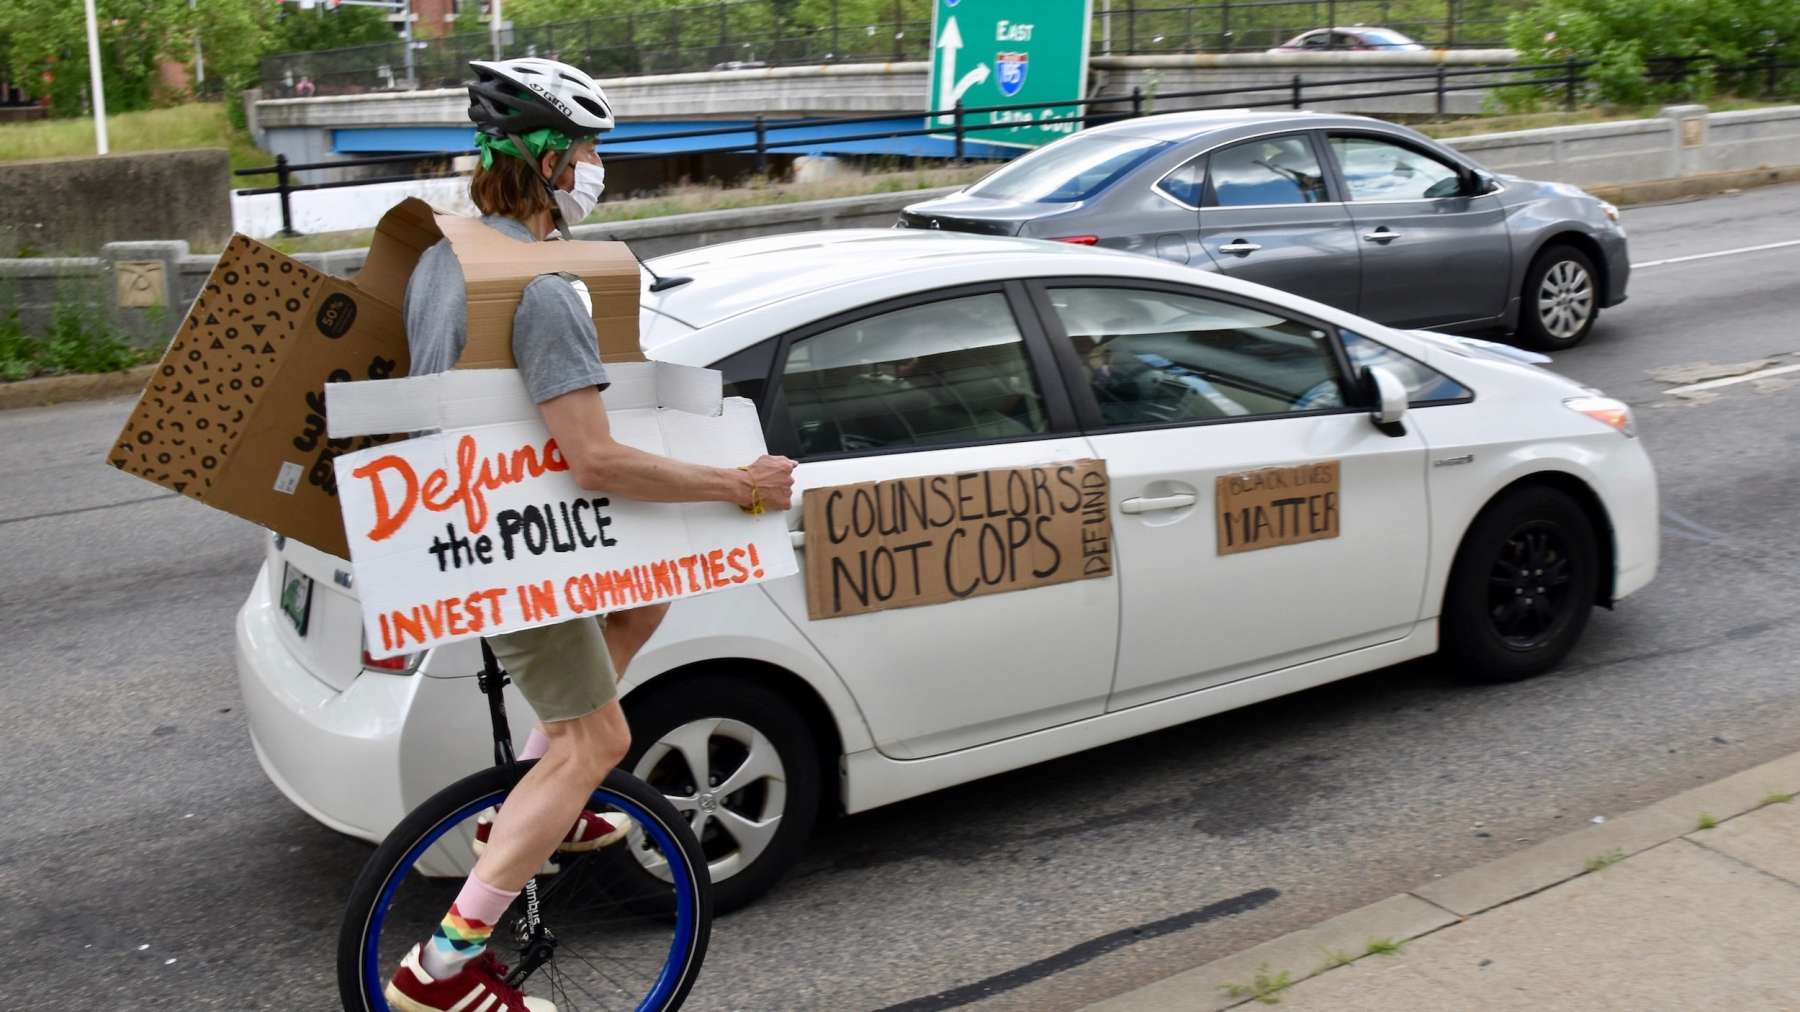 Car Caravan to Defund the Police circles Providence Public Safety on Saturday